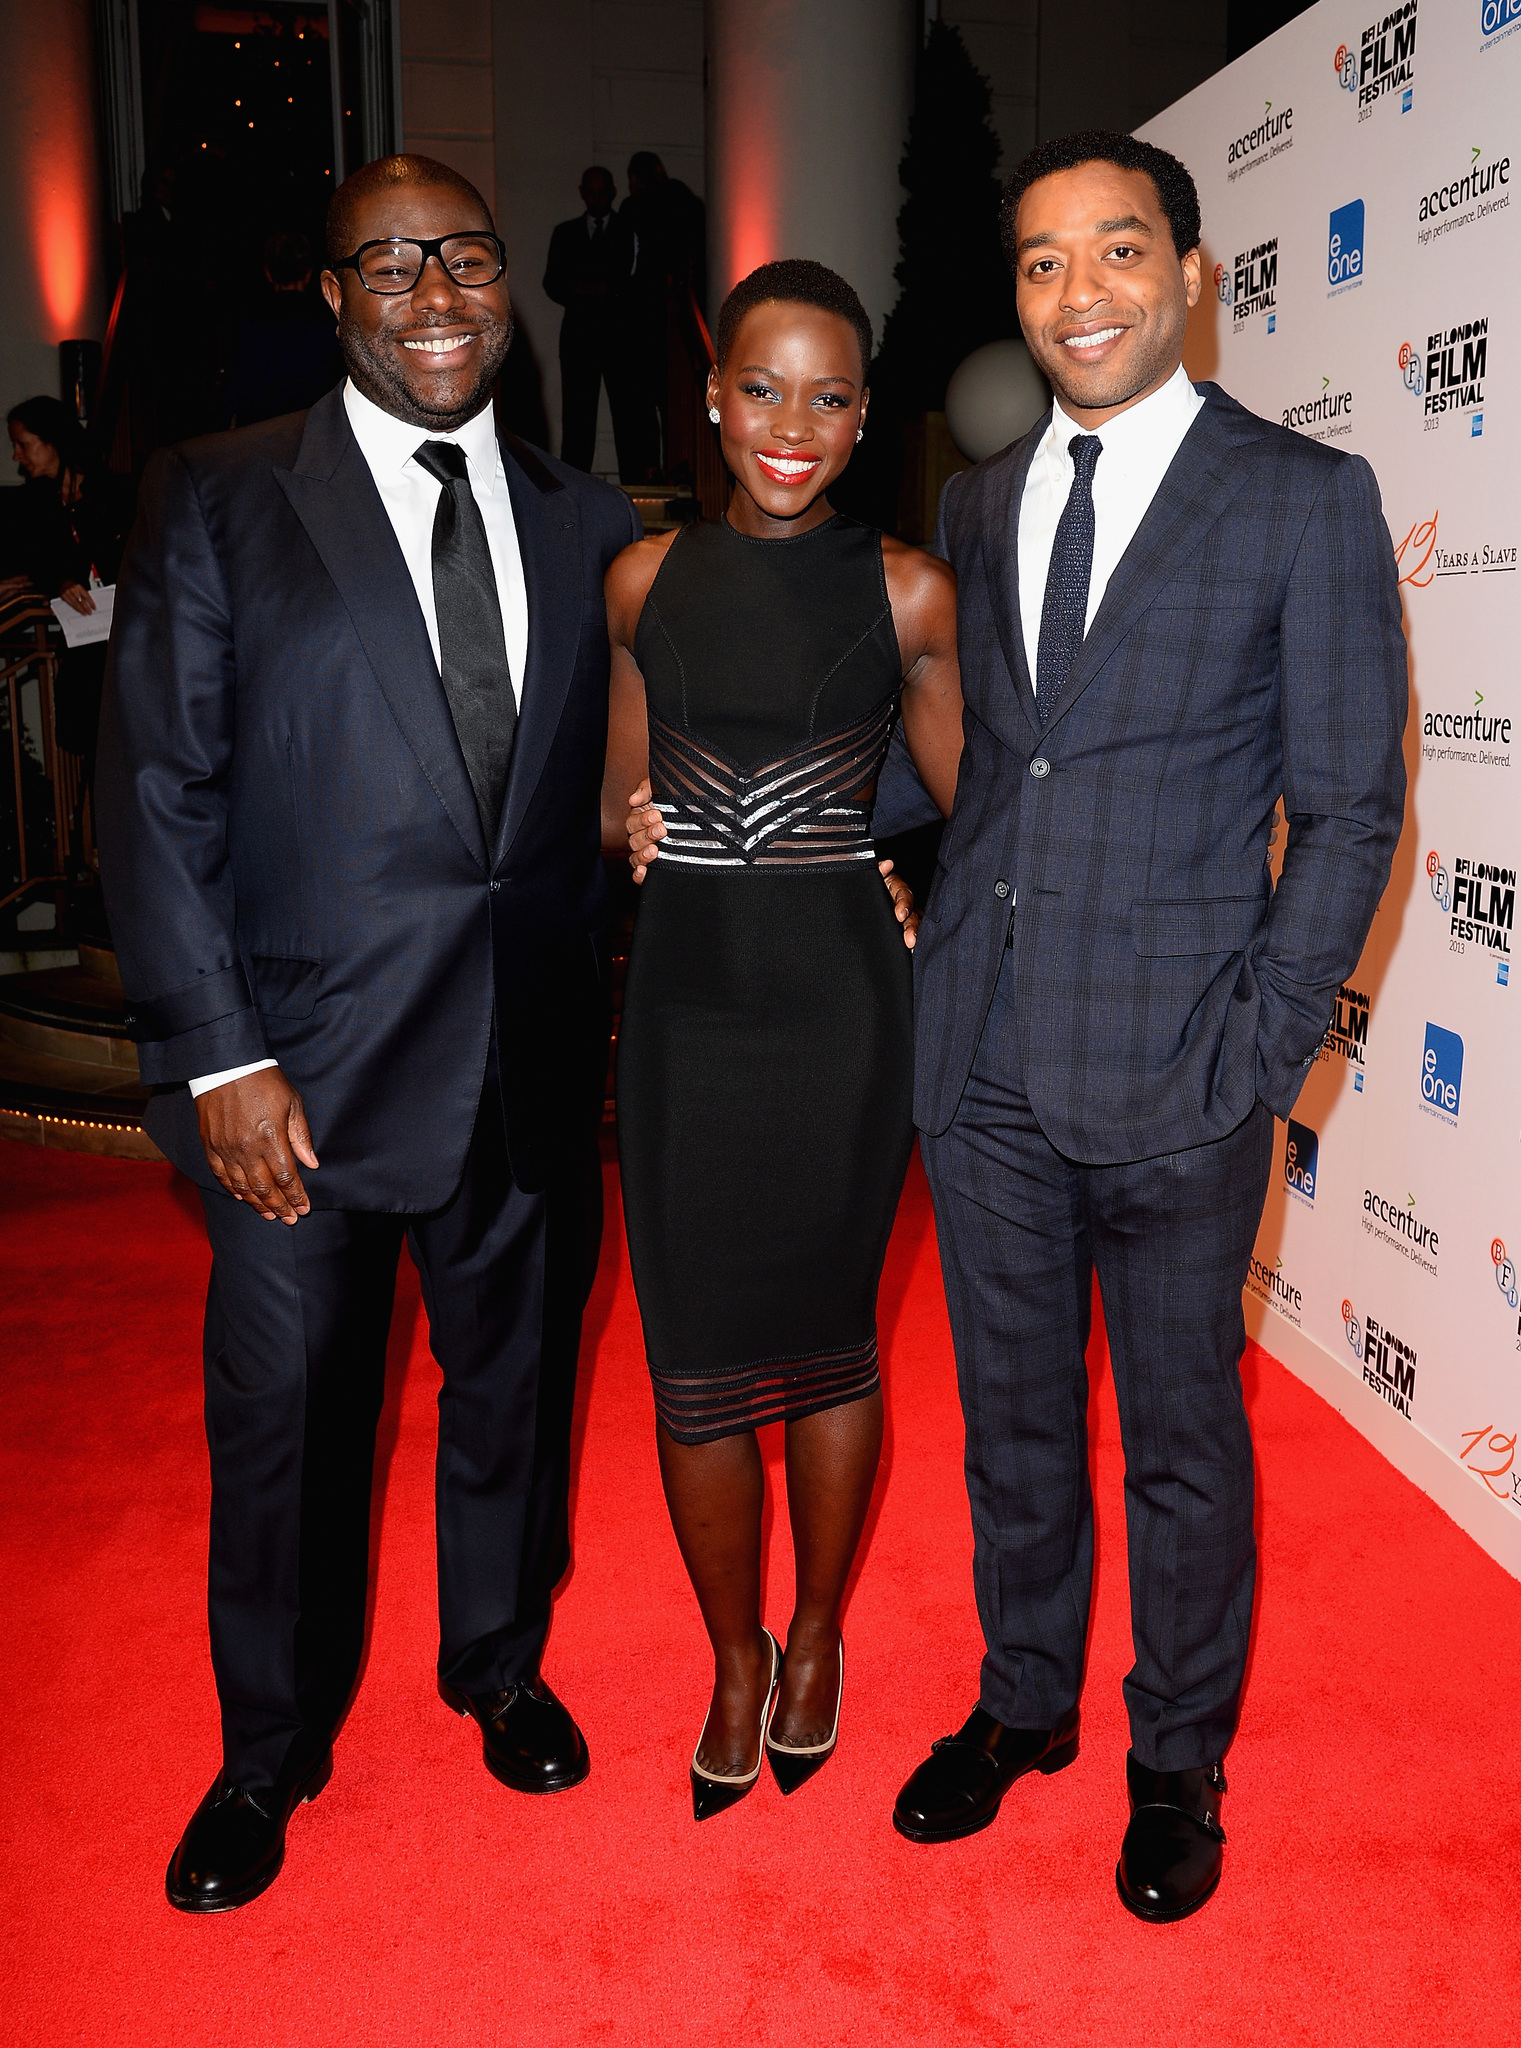 Chiwetel Ejiofor, Lupita Nyong'o and Steve McQueen at event of 12 vergoves metu (2013)